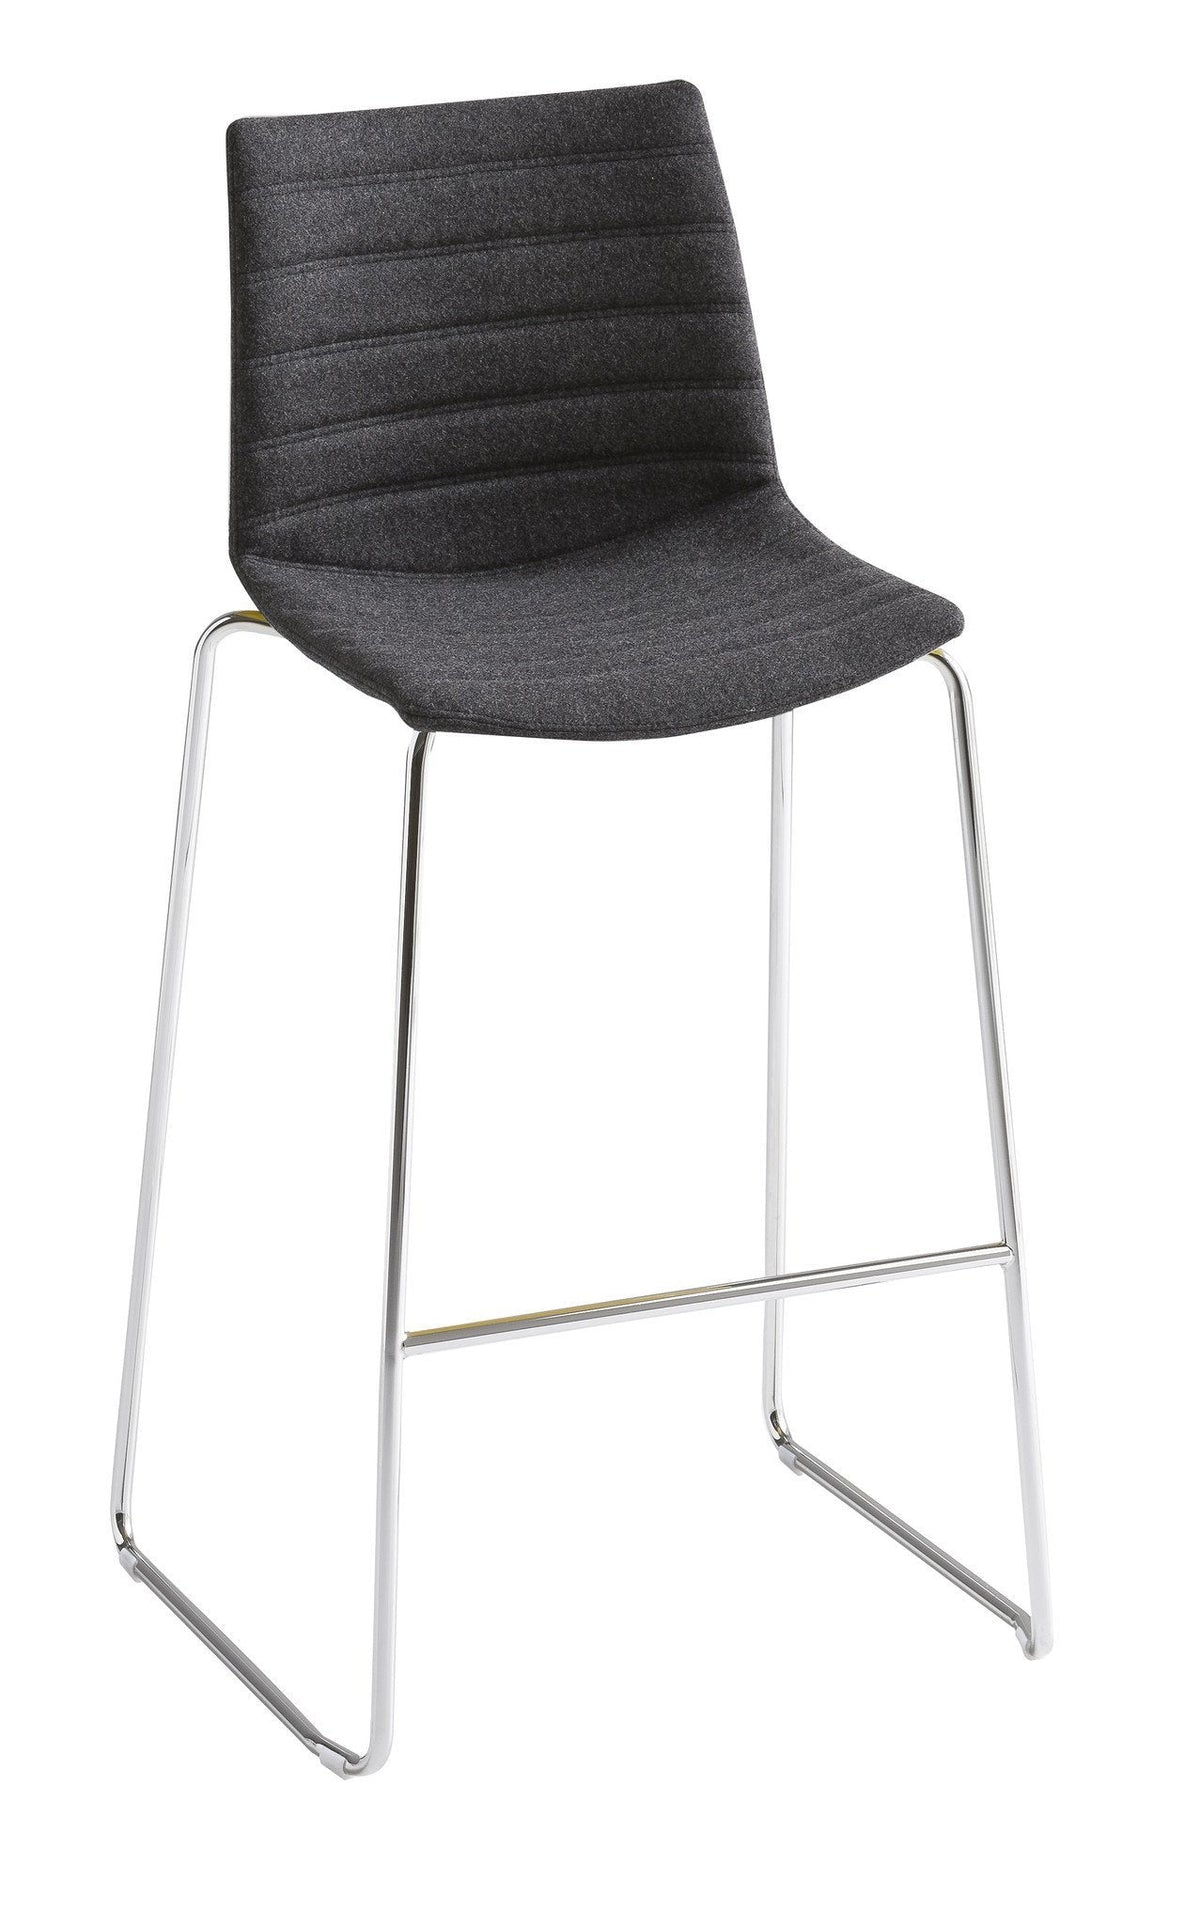 Kanvas Full High Stool c/w Sled Legs-Gaber-Contract Furniture Store